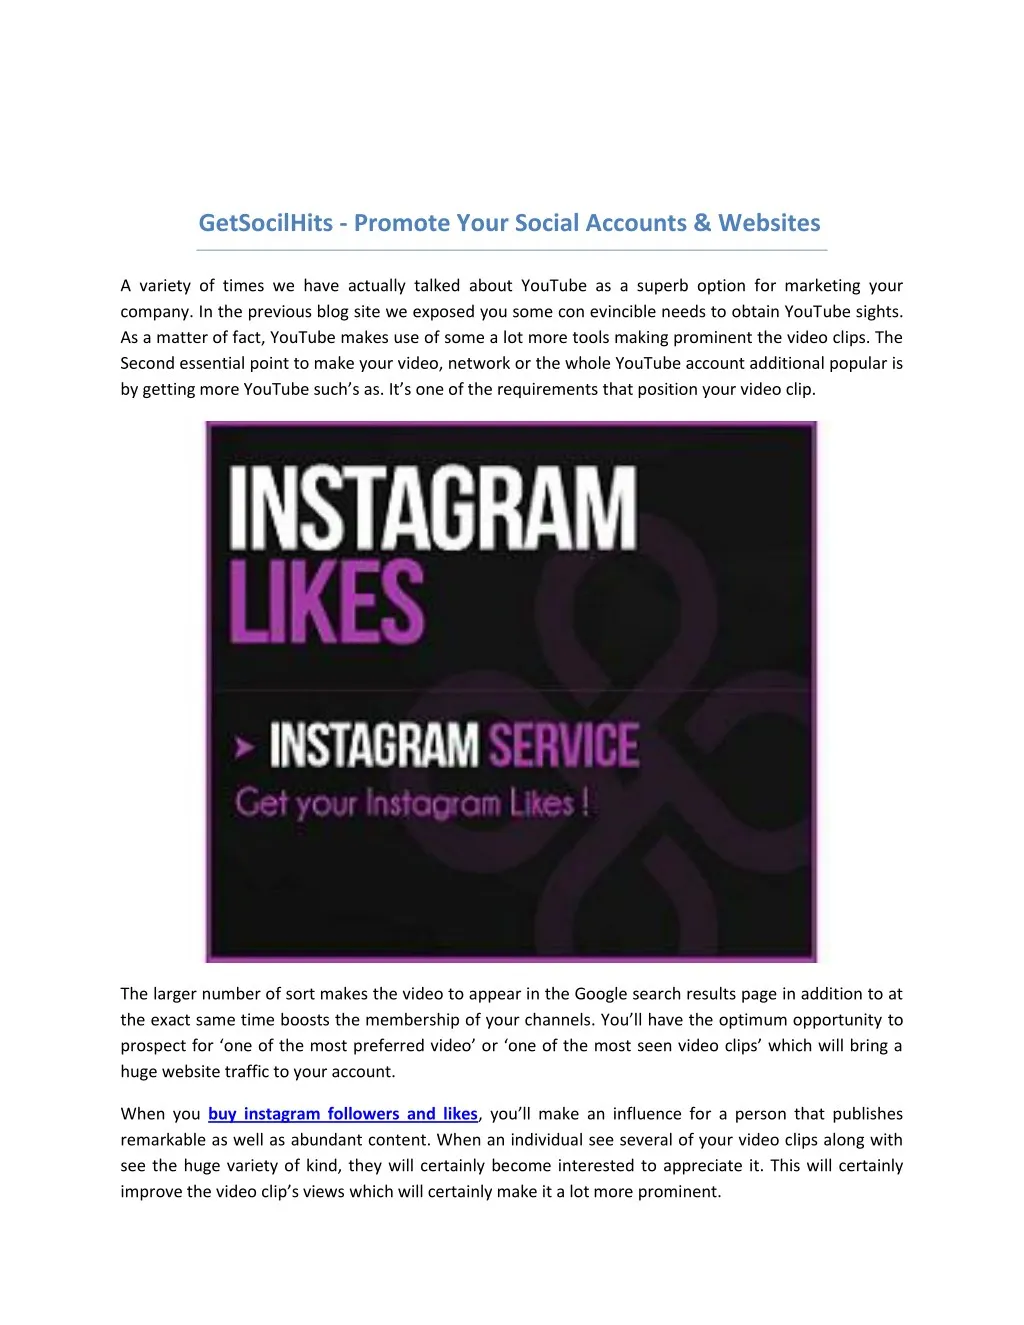 getsocilhits promote your social accounts websites